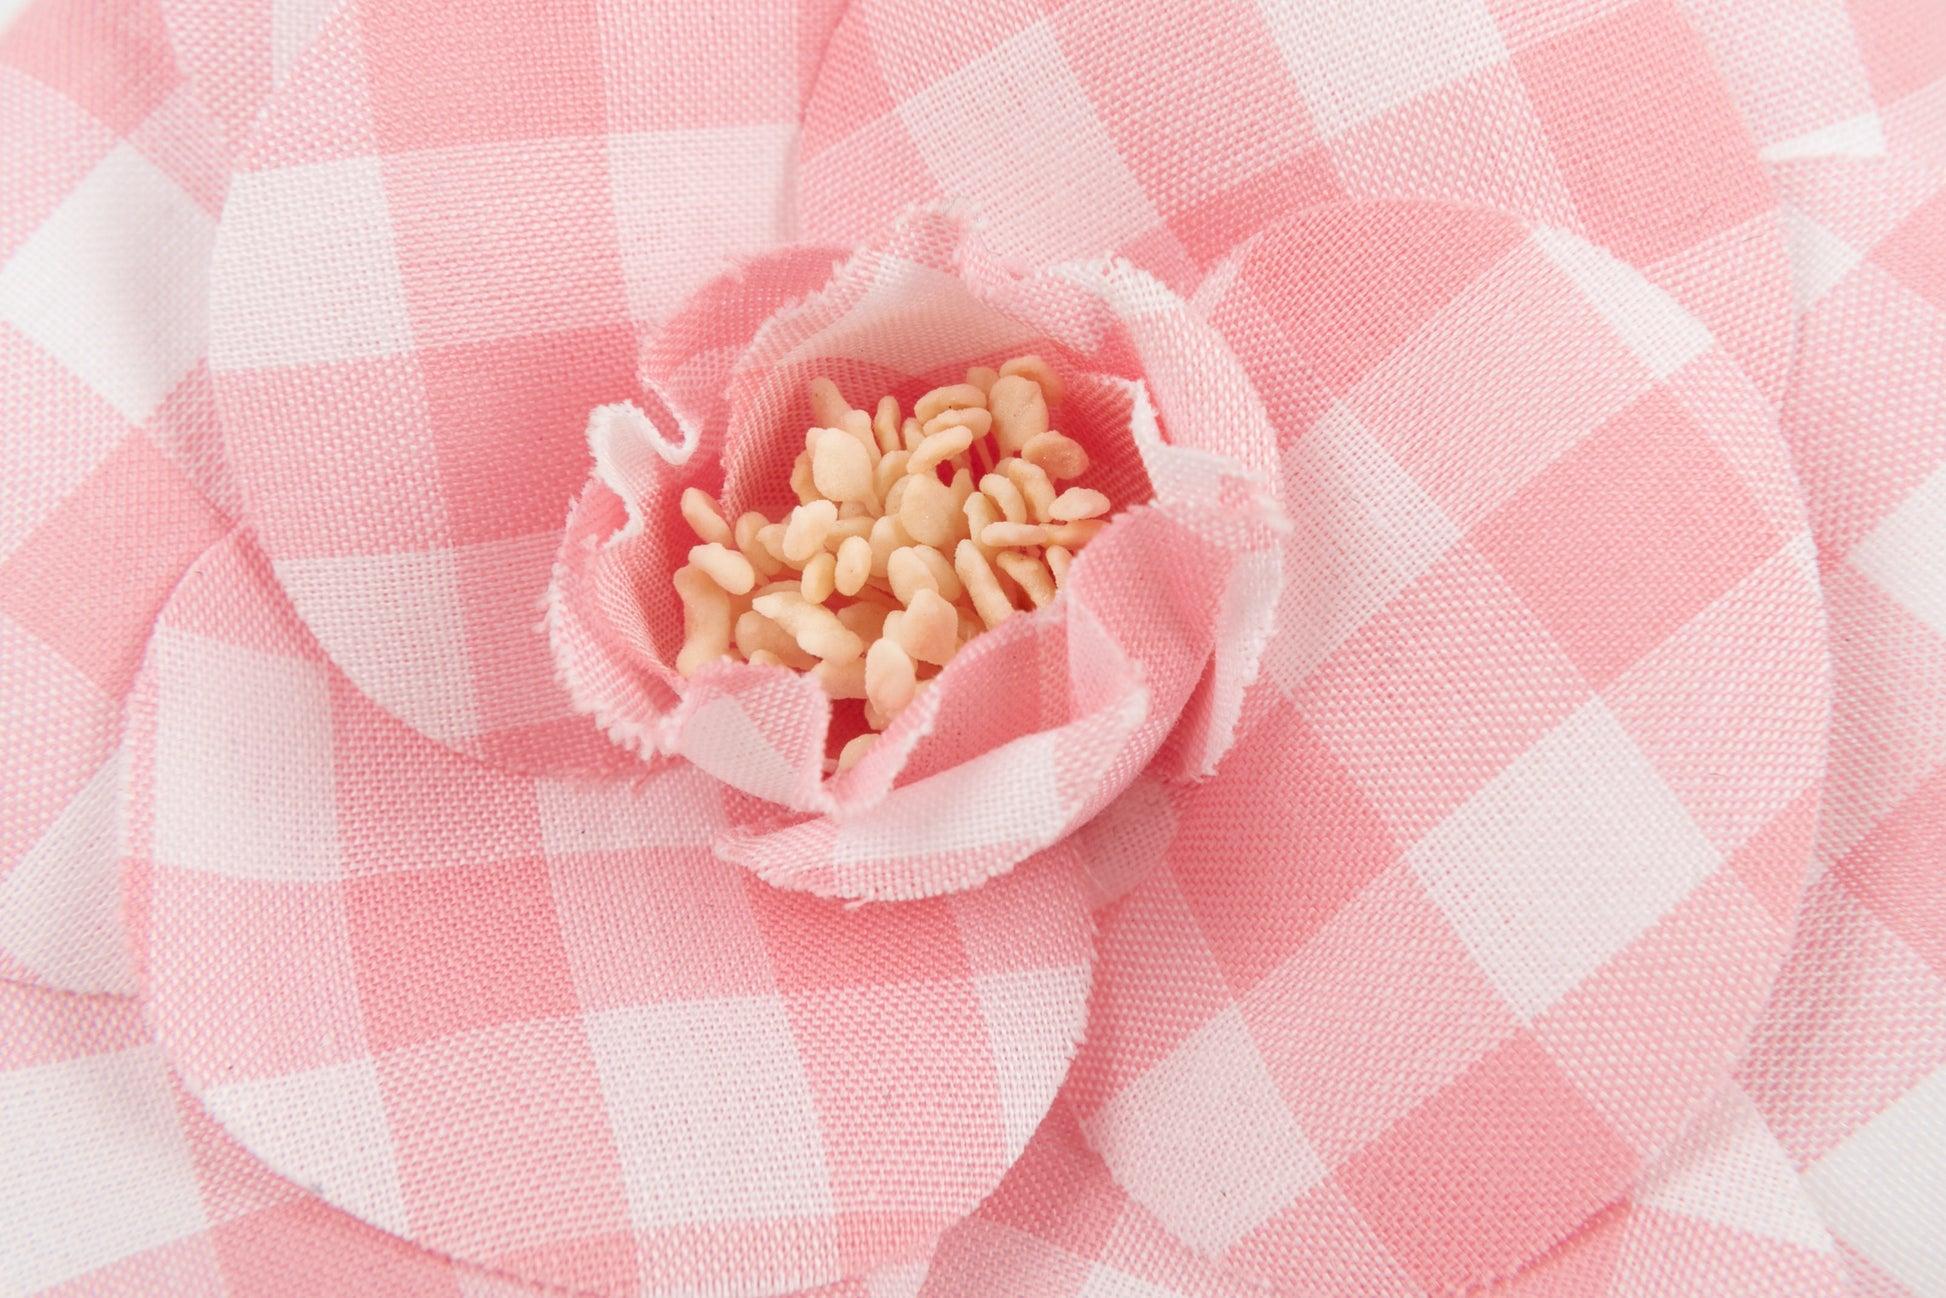 Chanel - (Made in France) Camellia brooch made of pink and white gingham fabric. Collector's piece from the beginning of the 1990s.

Additional information:
Condition: Very good condition
Dimensions: Diameter: 8 cm
Period: 20th Century

Seller